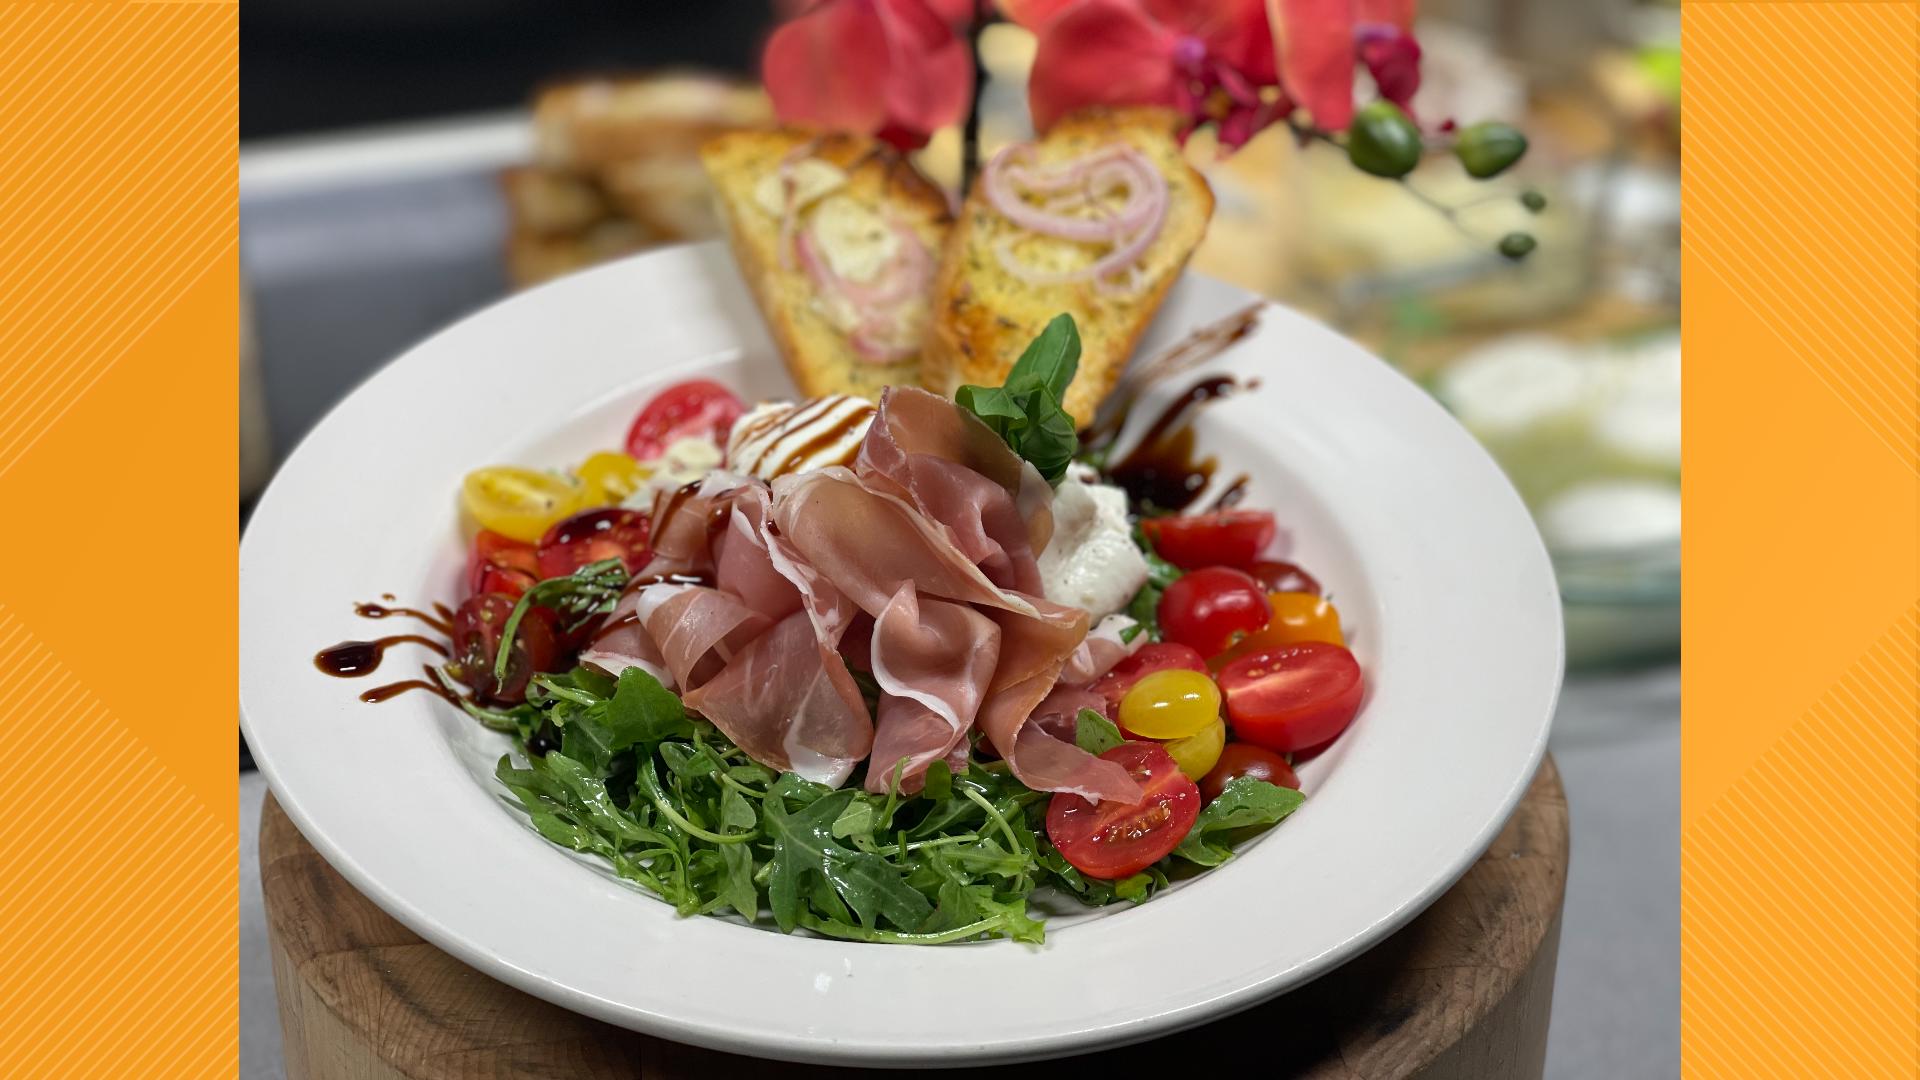 Summer salads are the perfect fare to beat the heat. Olivia's is keeping it light and fresh with a Prosciutto Burrata Salad.